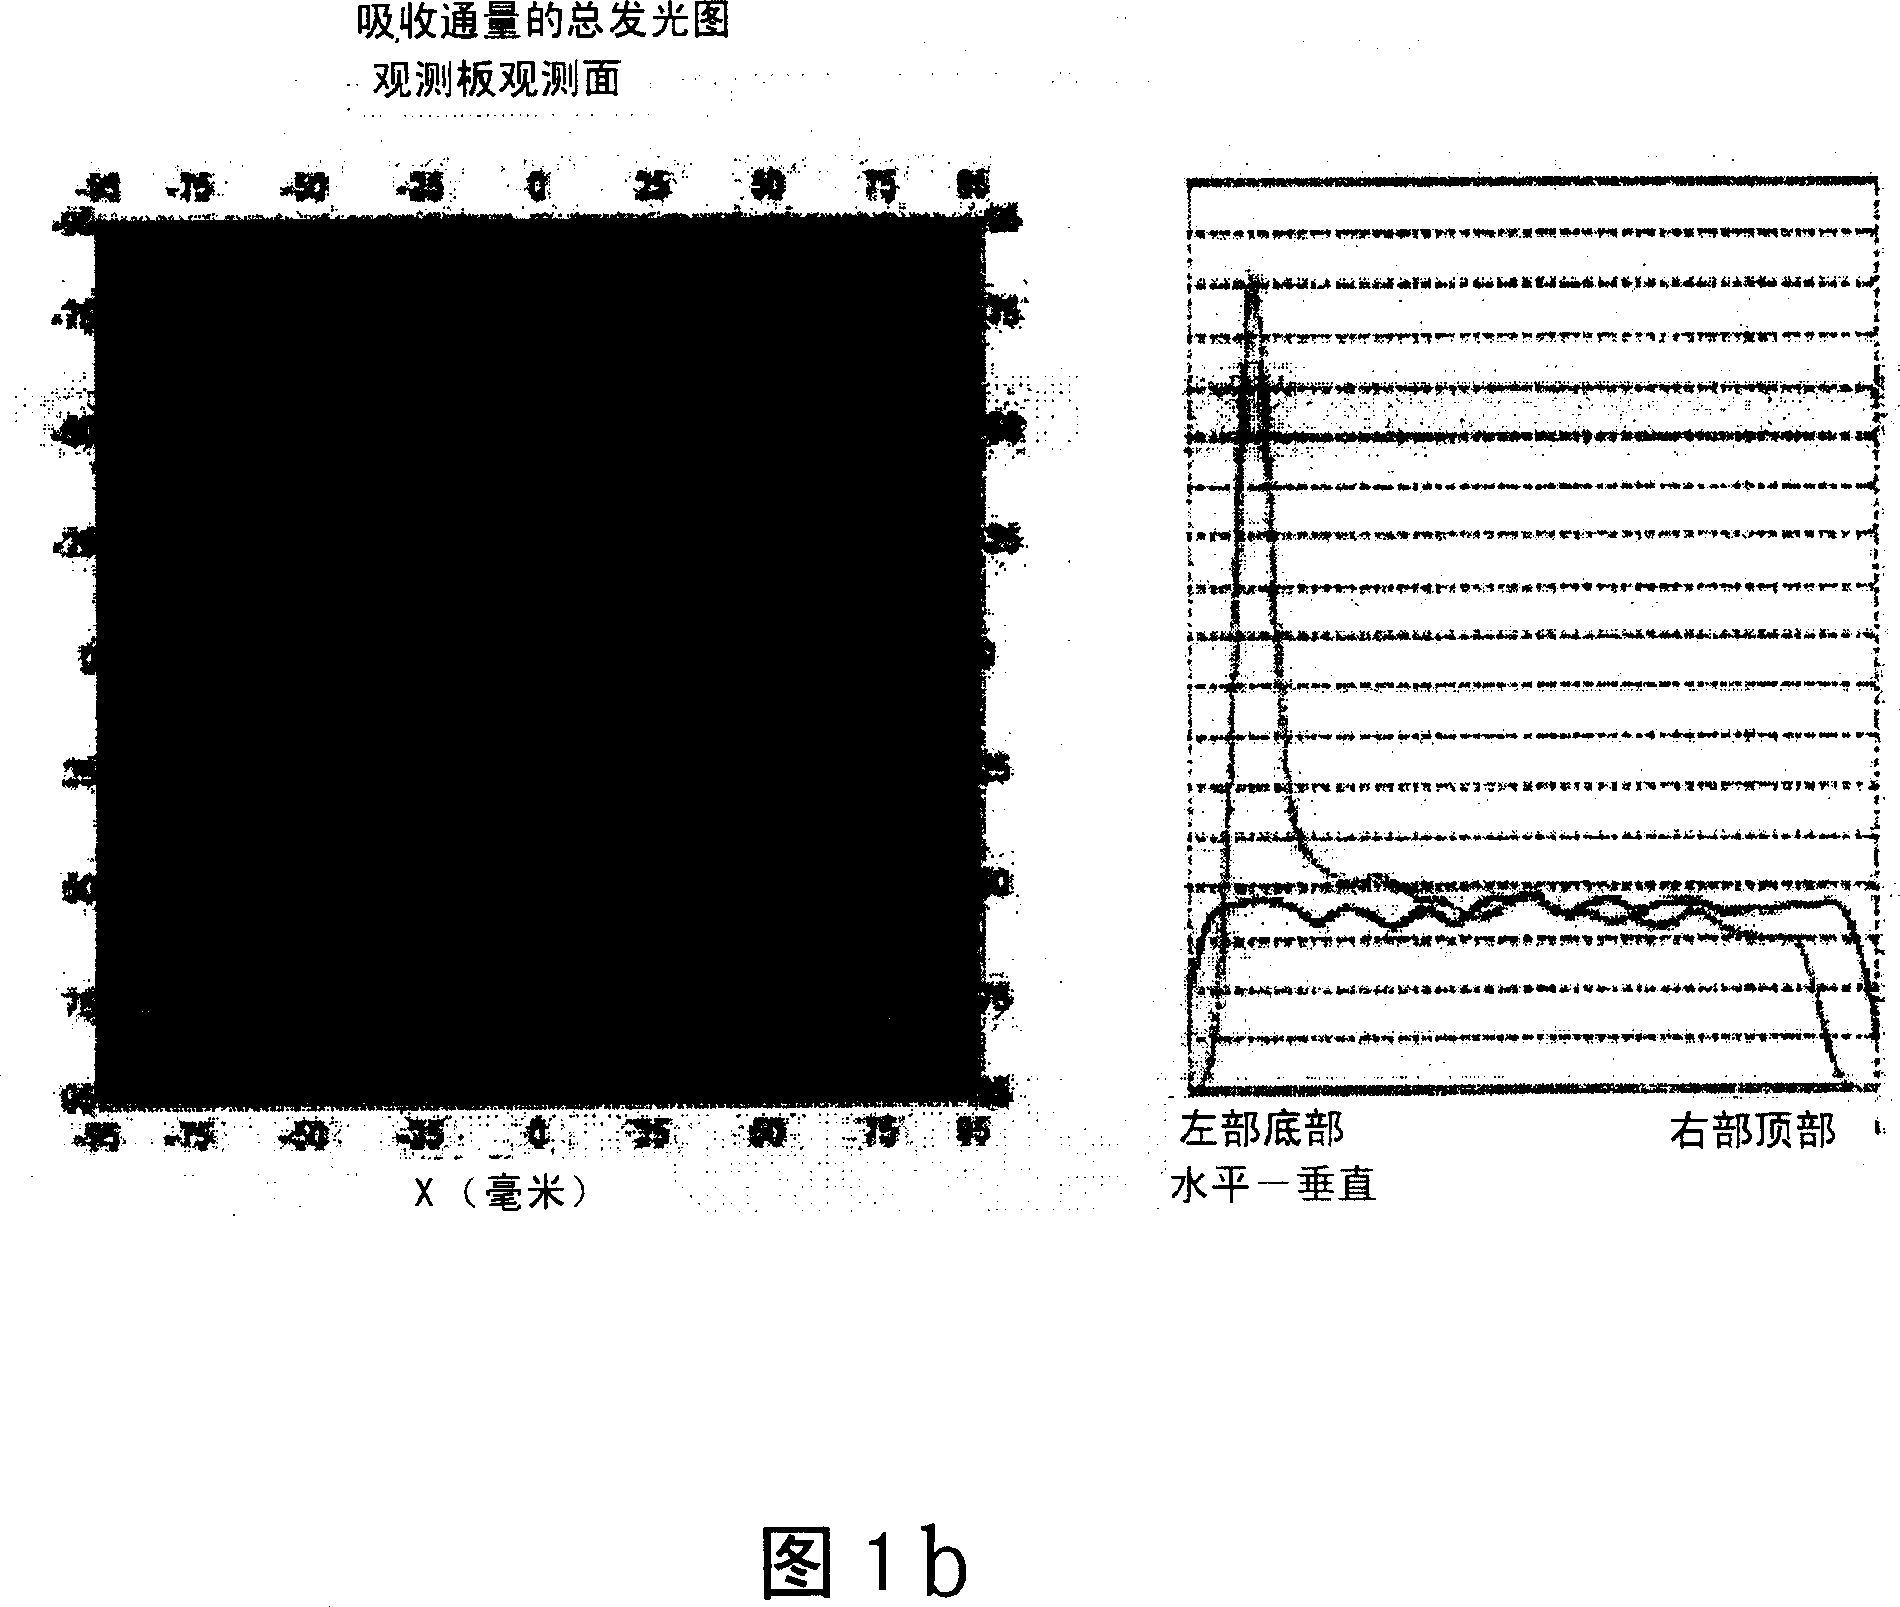 Backlight module for flat display device